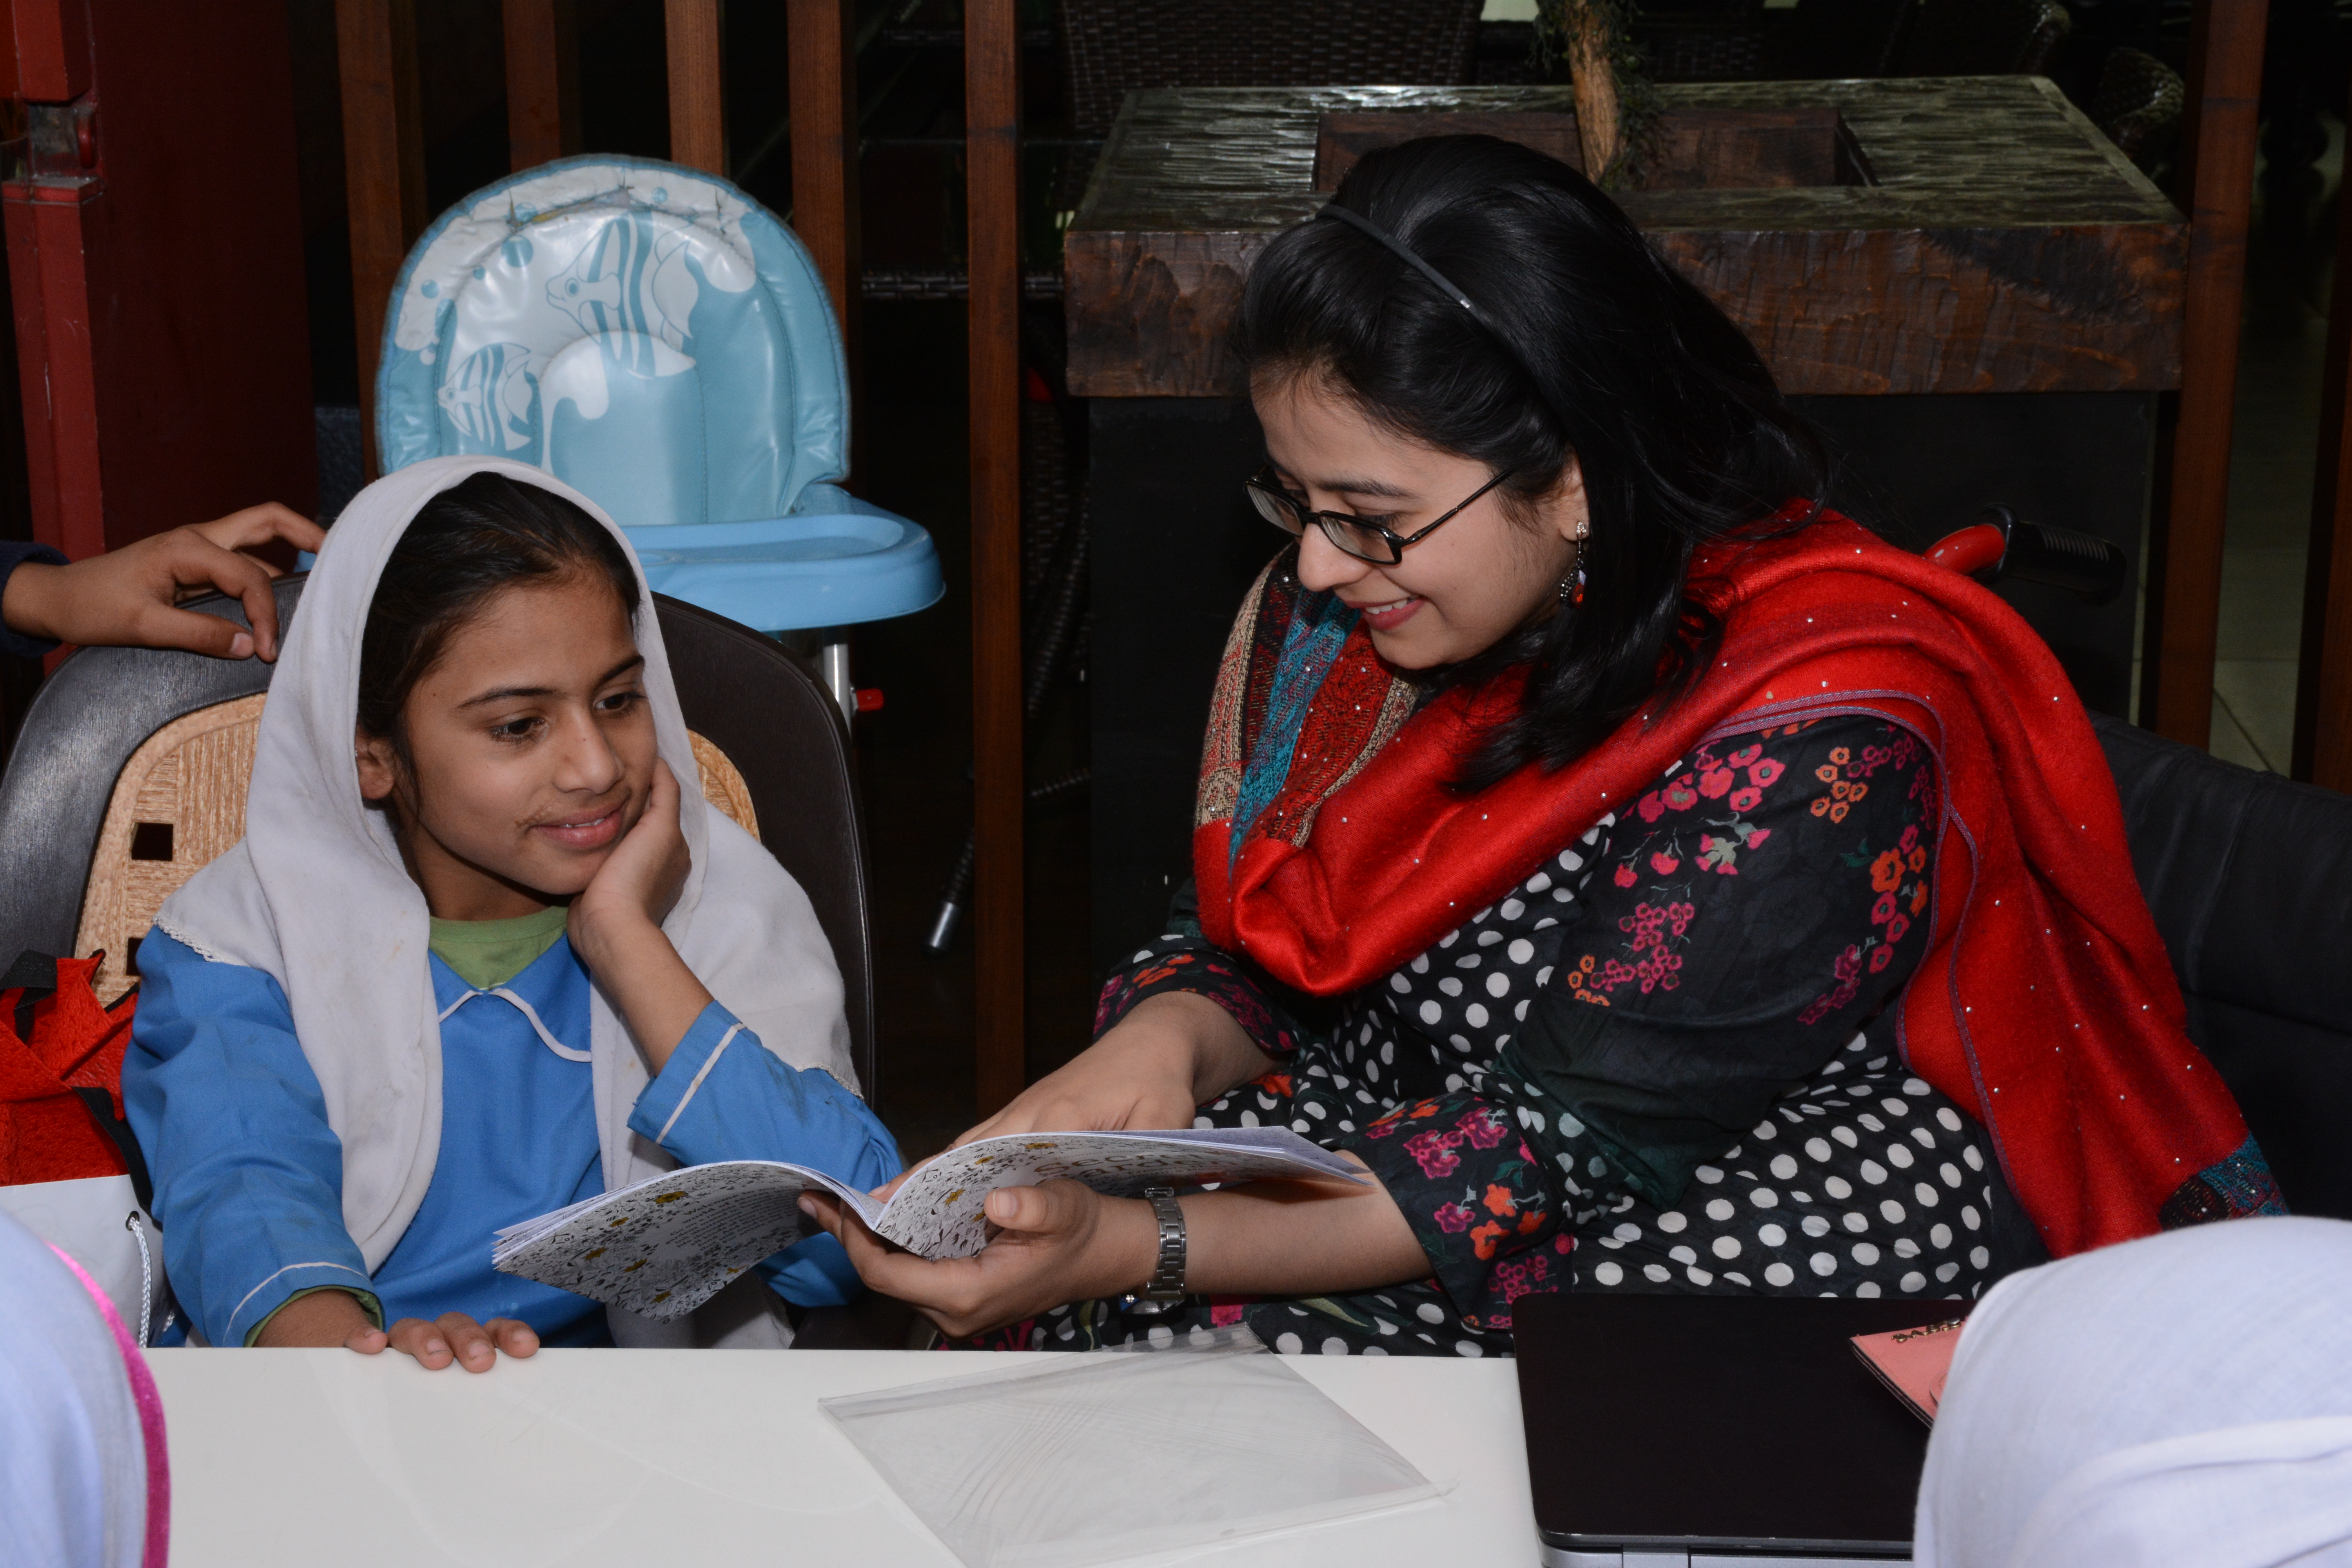 Tayyaba looks through a book with another young woman